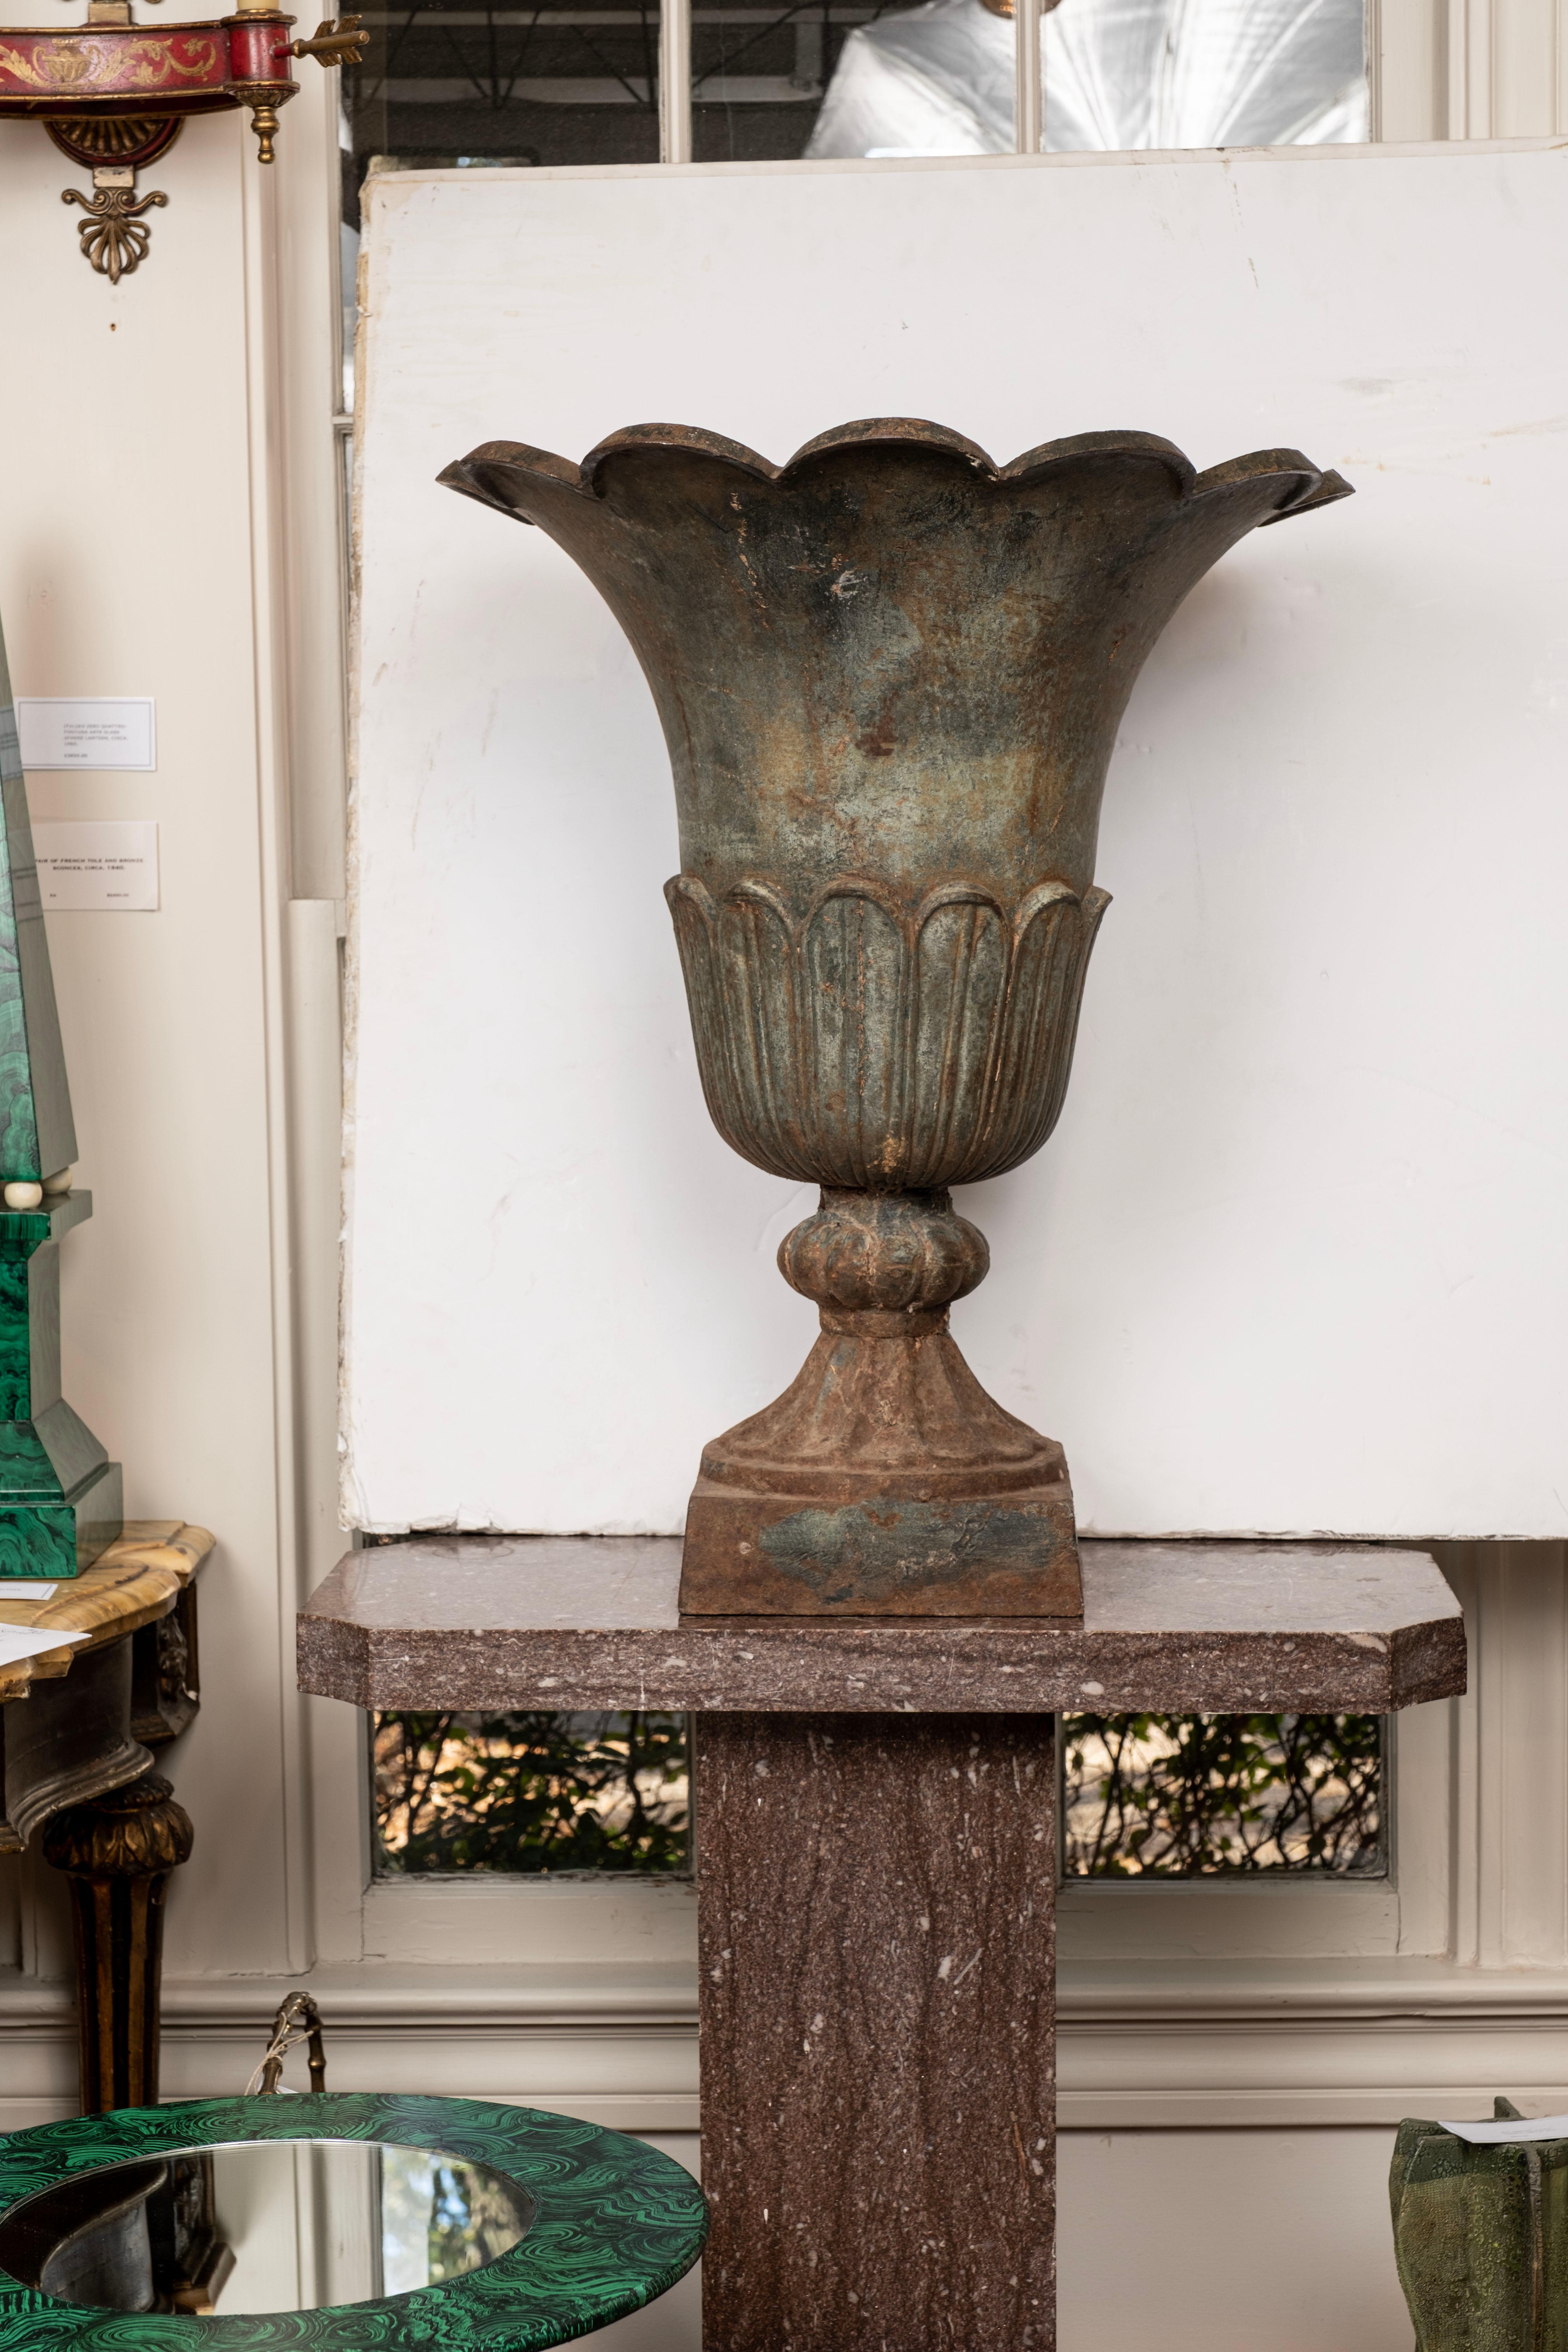 Monumental Pair of French Art Deco Cast Iron Garden Urns or Planters.
These are a stunning pair of French Art Deco iron garden urns, planters, jardinieres. 
Great Art Deco design with beautiful lines in this pair of French Art Deco garden